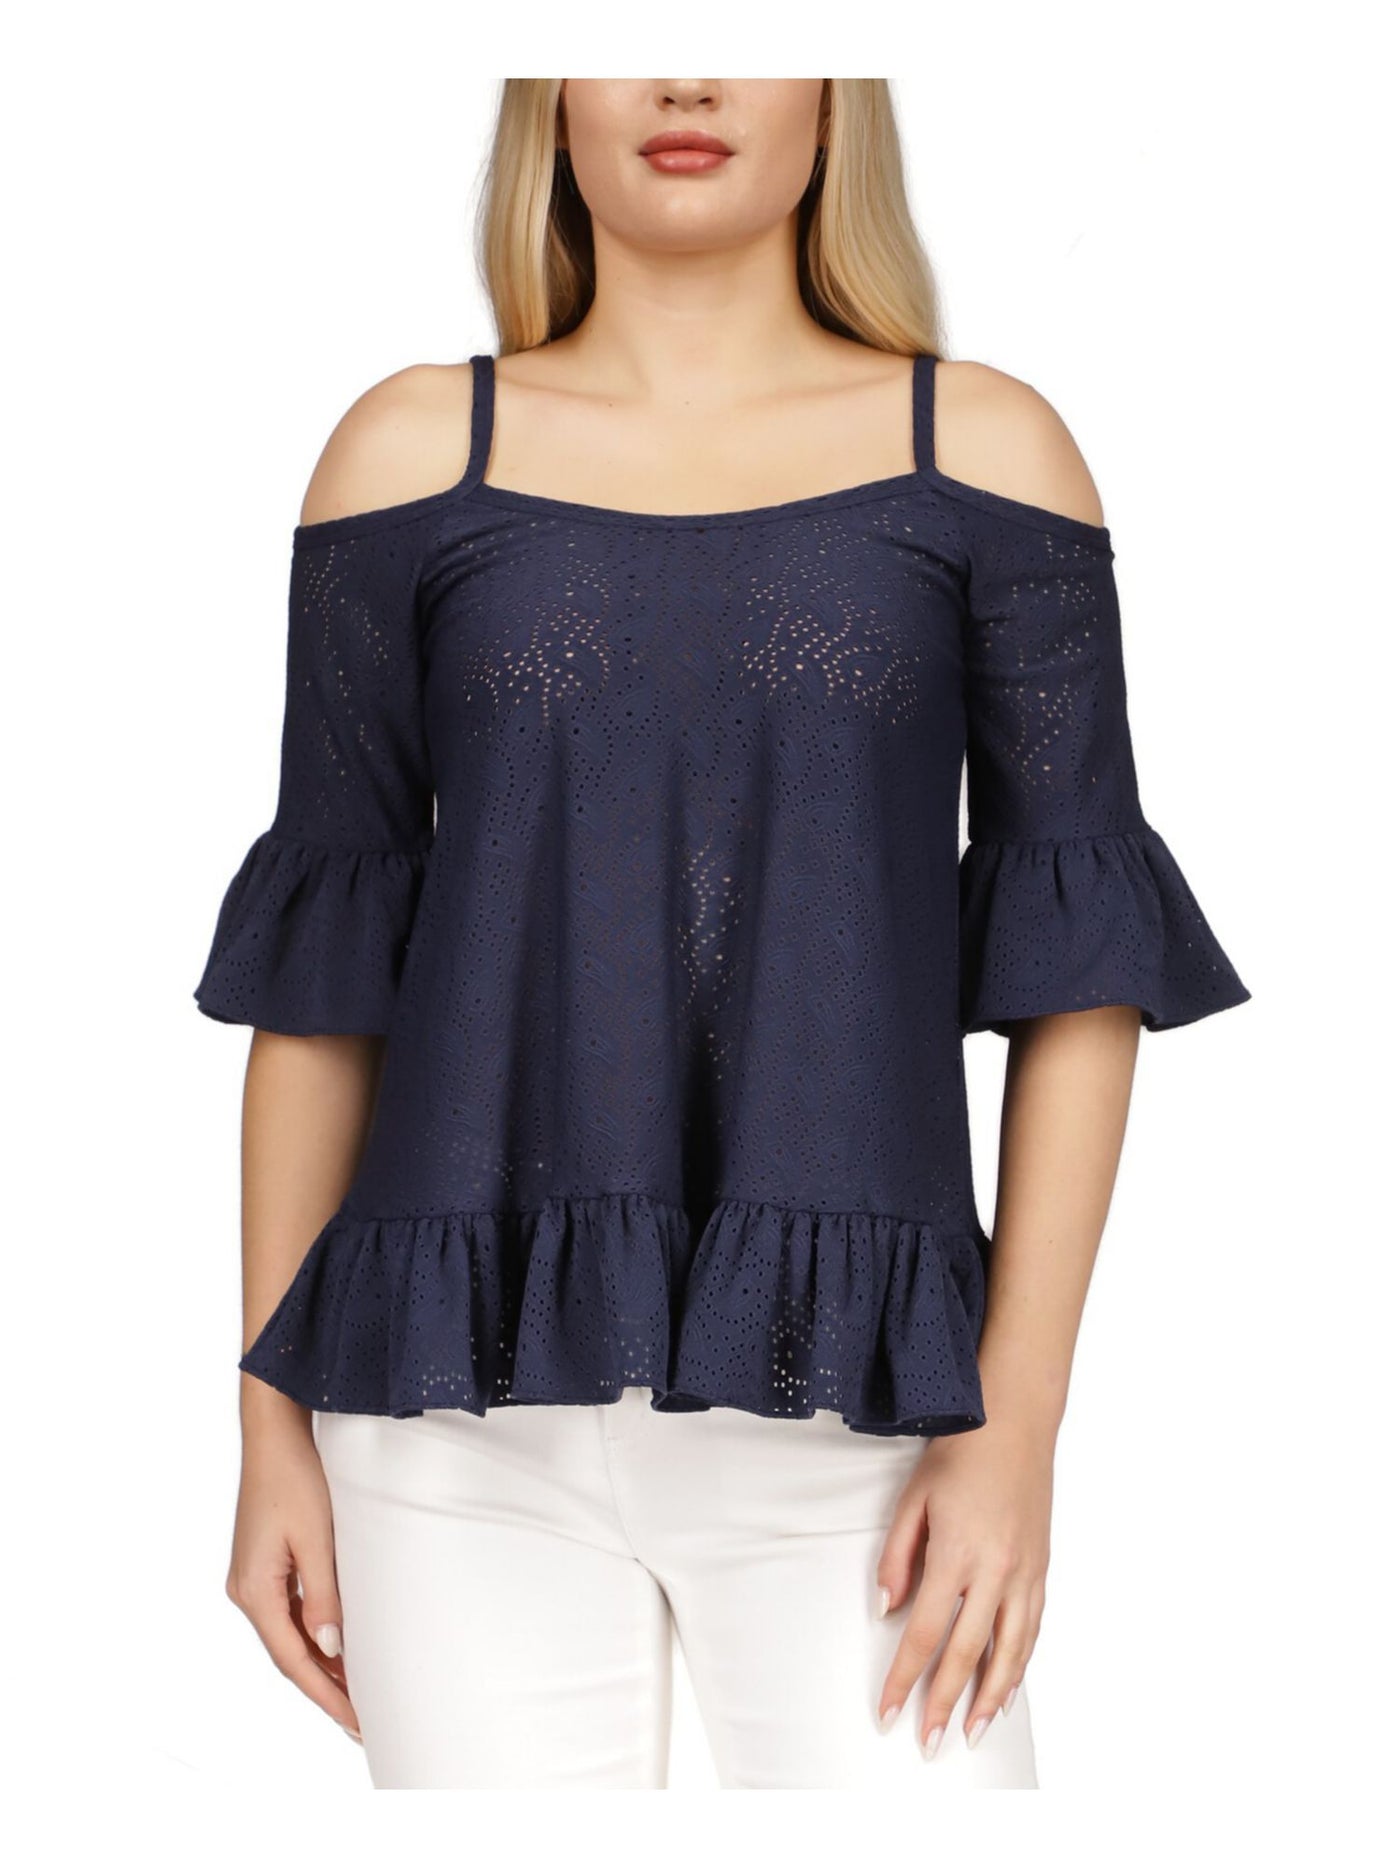 MICHAEL MICHAEL KORS Womens Navy Cold Shoulder Eyelet Ruffled Unlined Bell Sleeve Square Neck Top S